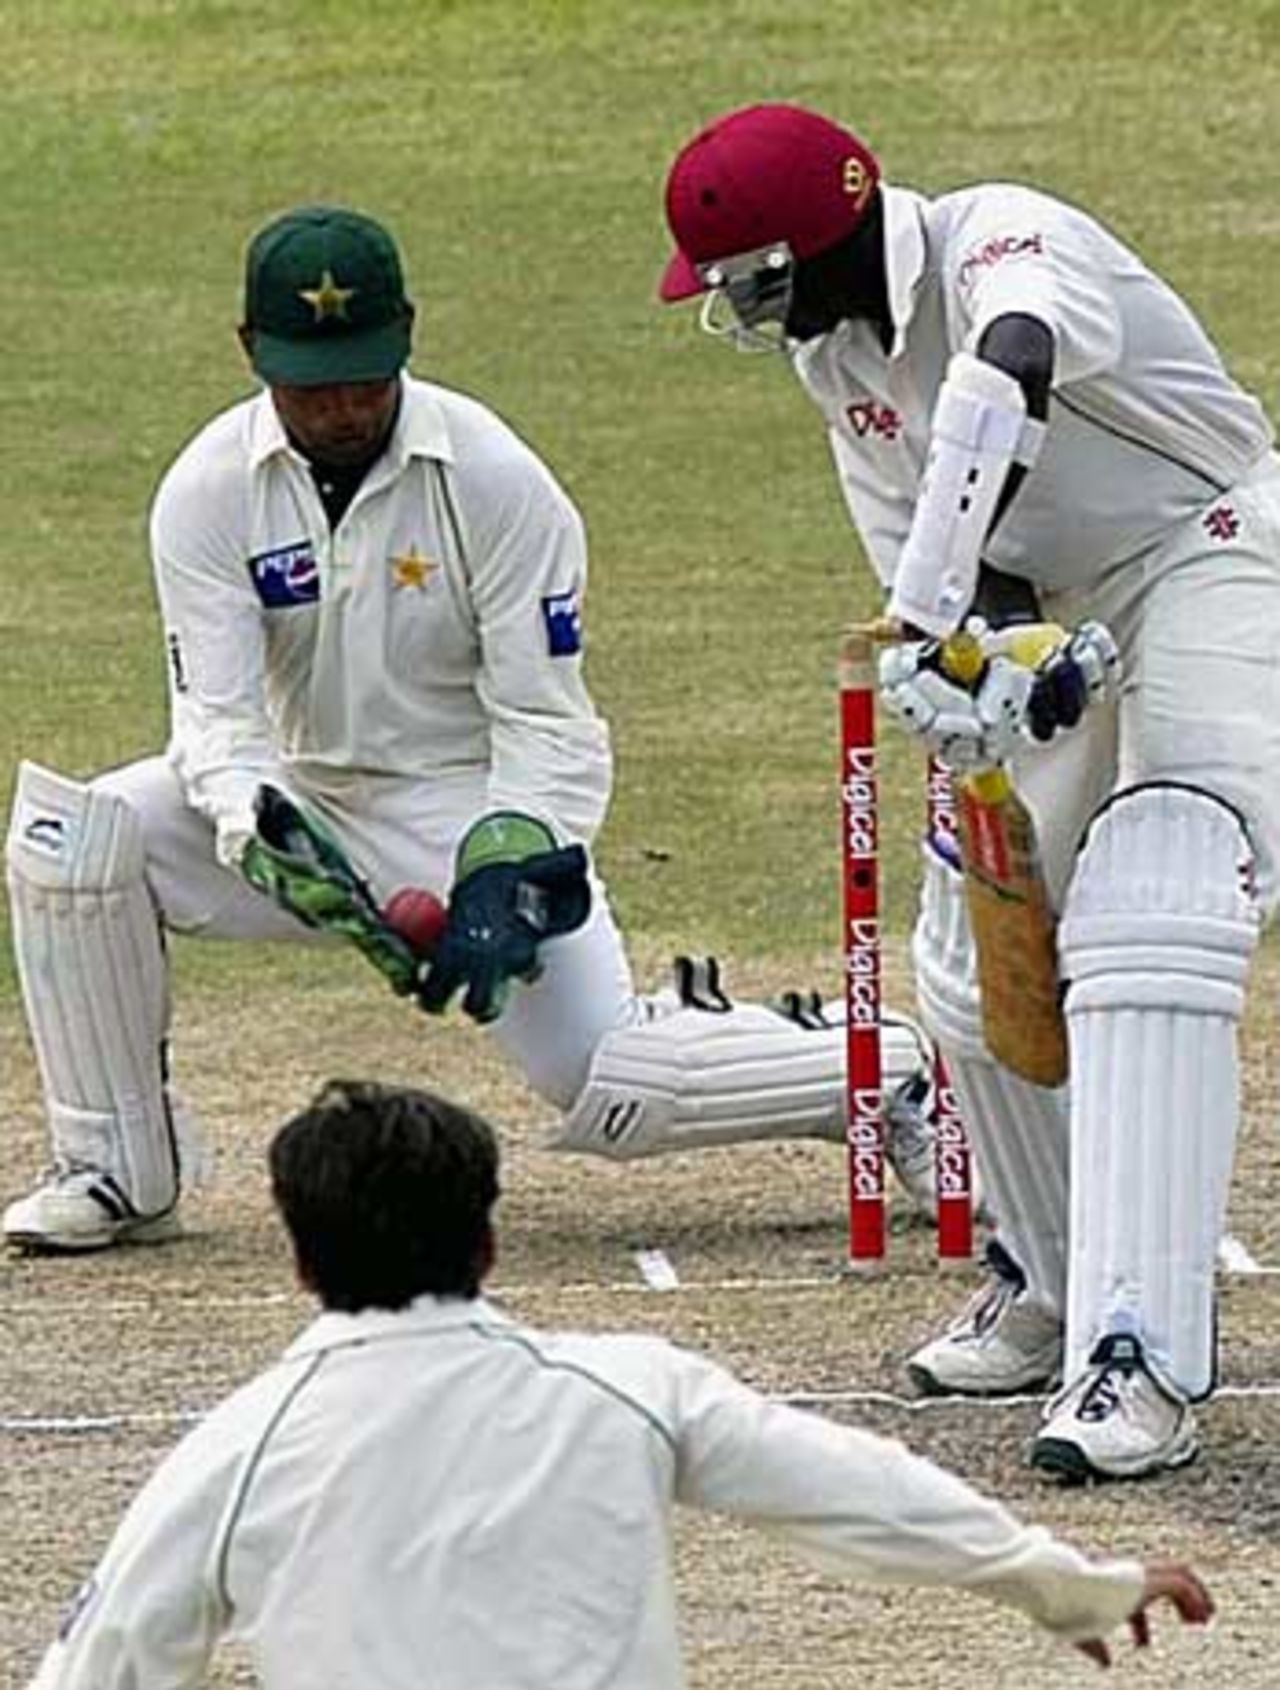 Courtney Browne is caught behind off Shahid Afridi, West Indies v Pakistan, 1st Test, Barbados, May 28